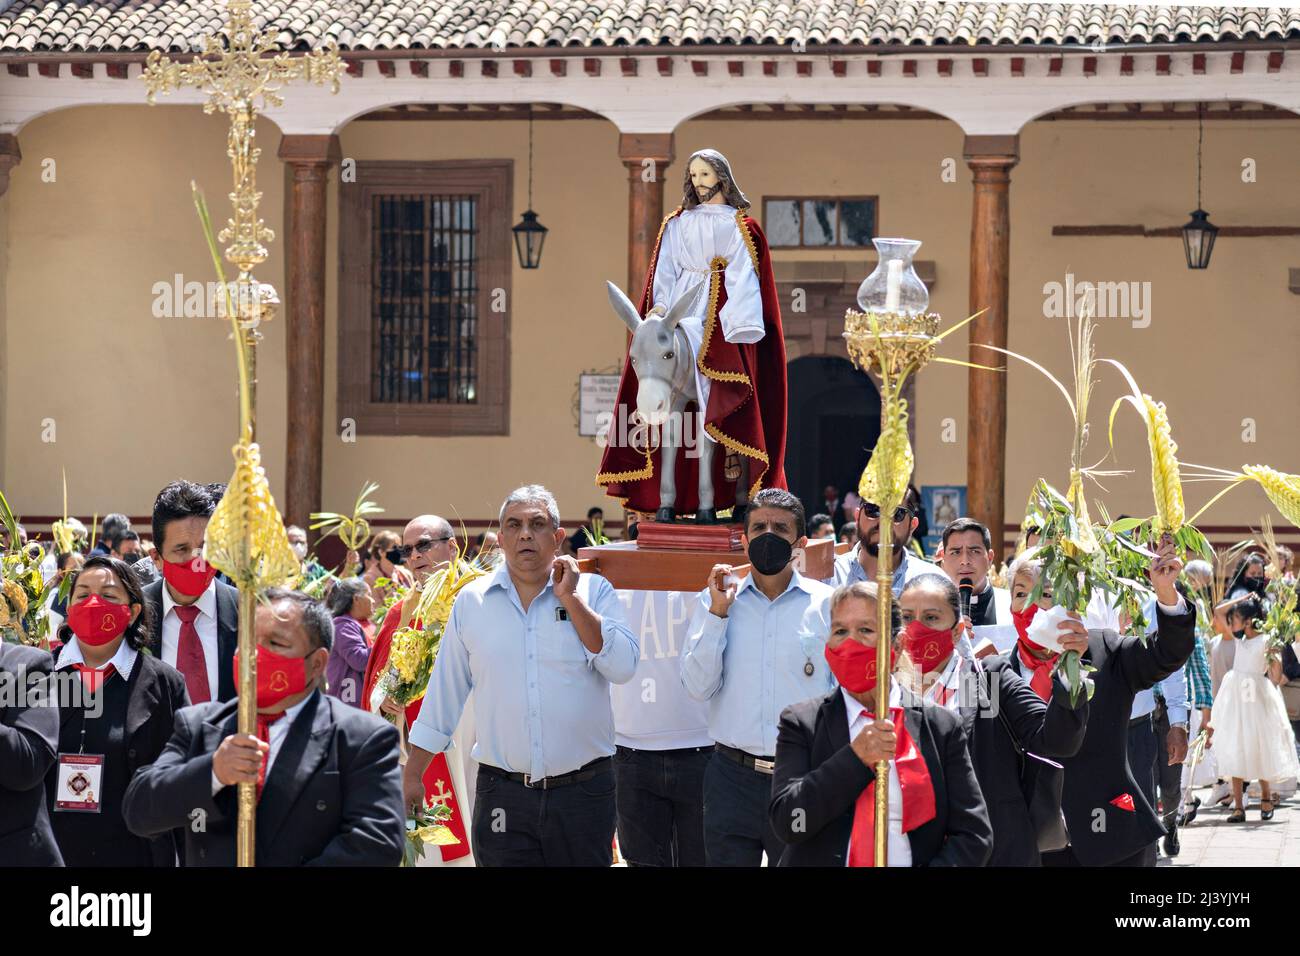 Patzcuaro, Mexico. 10th Apr, 2022. Mexican Christians, carry a statue of Jesus Christ, during a Palm Sunday procession at the Basílica de Nuestra Señora de la Salud, or Basilica of Our Lady of Health, in celebration of the traditional Sunday service marking the start of holy week, April 10, 2022 in Patzcuaro, Michoacan, Mexico. Credit: Richard Ellis/Richard Ellis/Alamy Live News Stock Photo